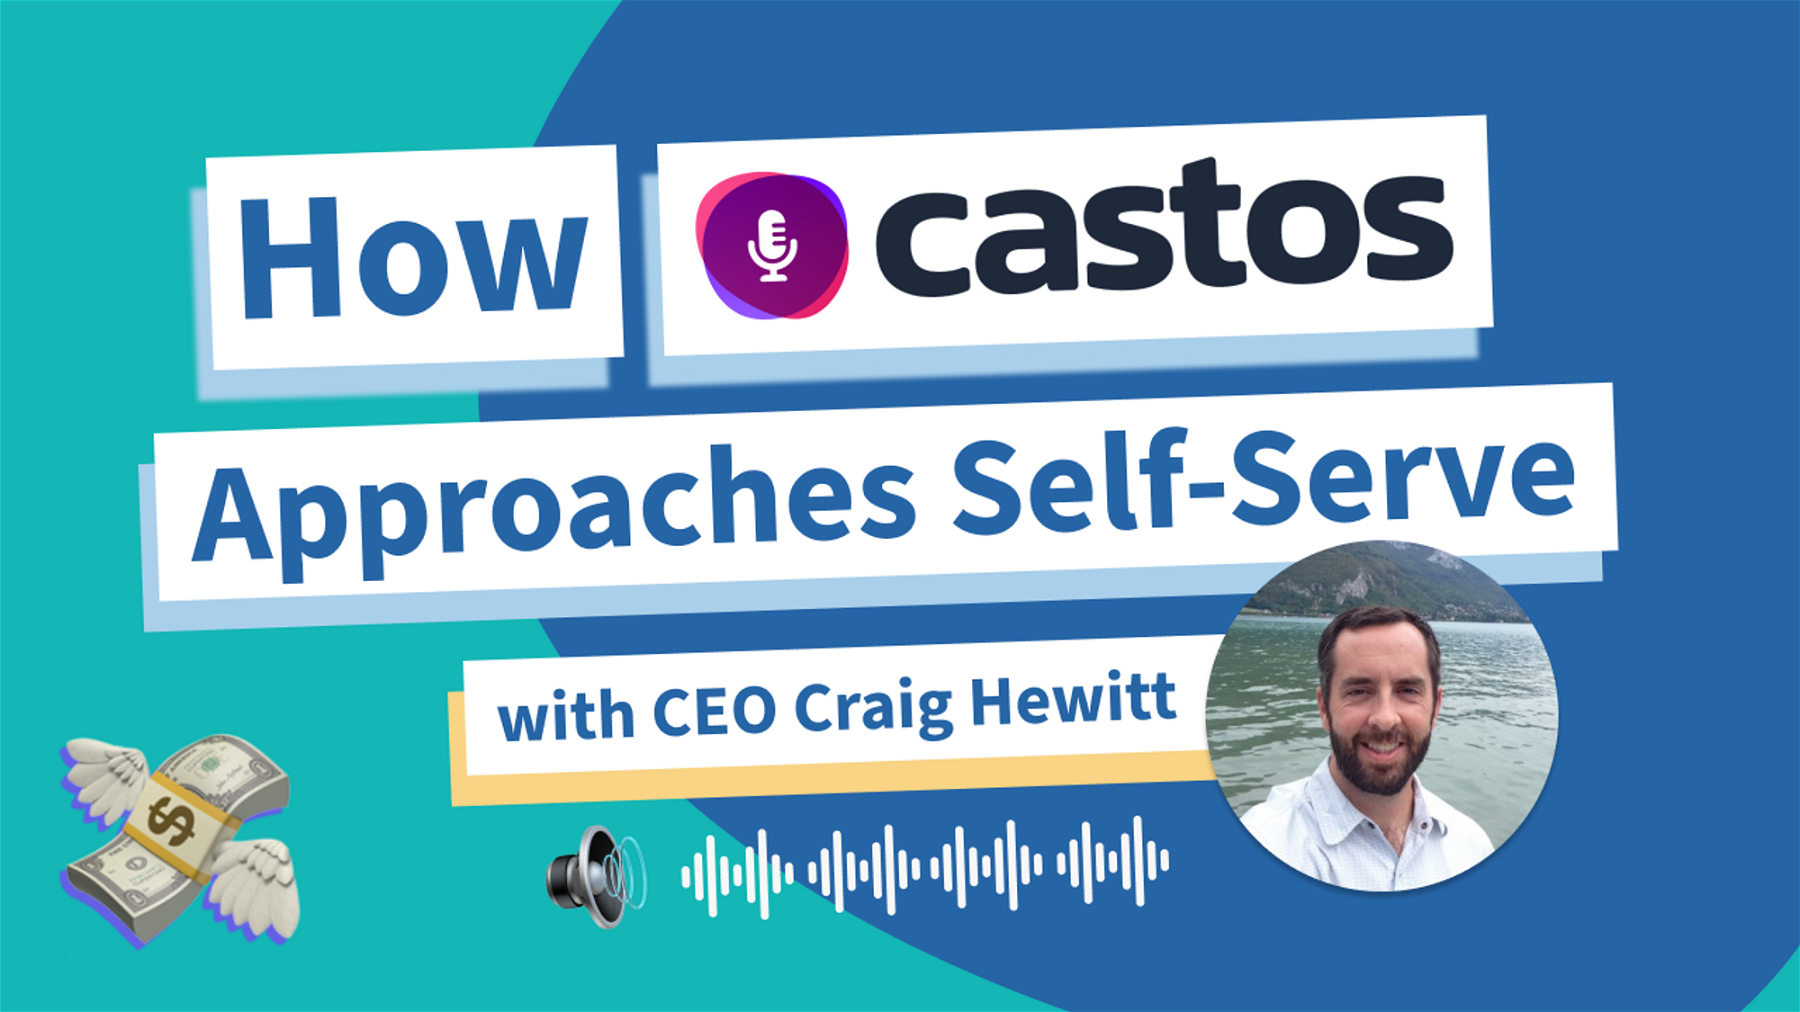 How Castos Approaches Self-Serve (with CEO Craig Hewitt)